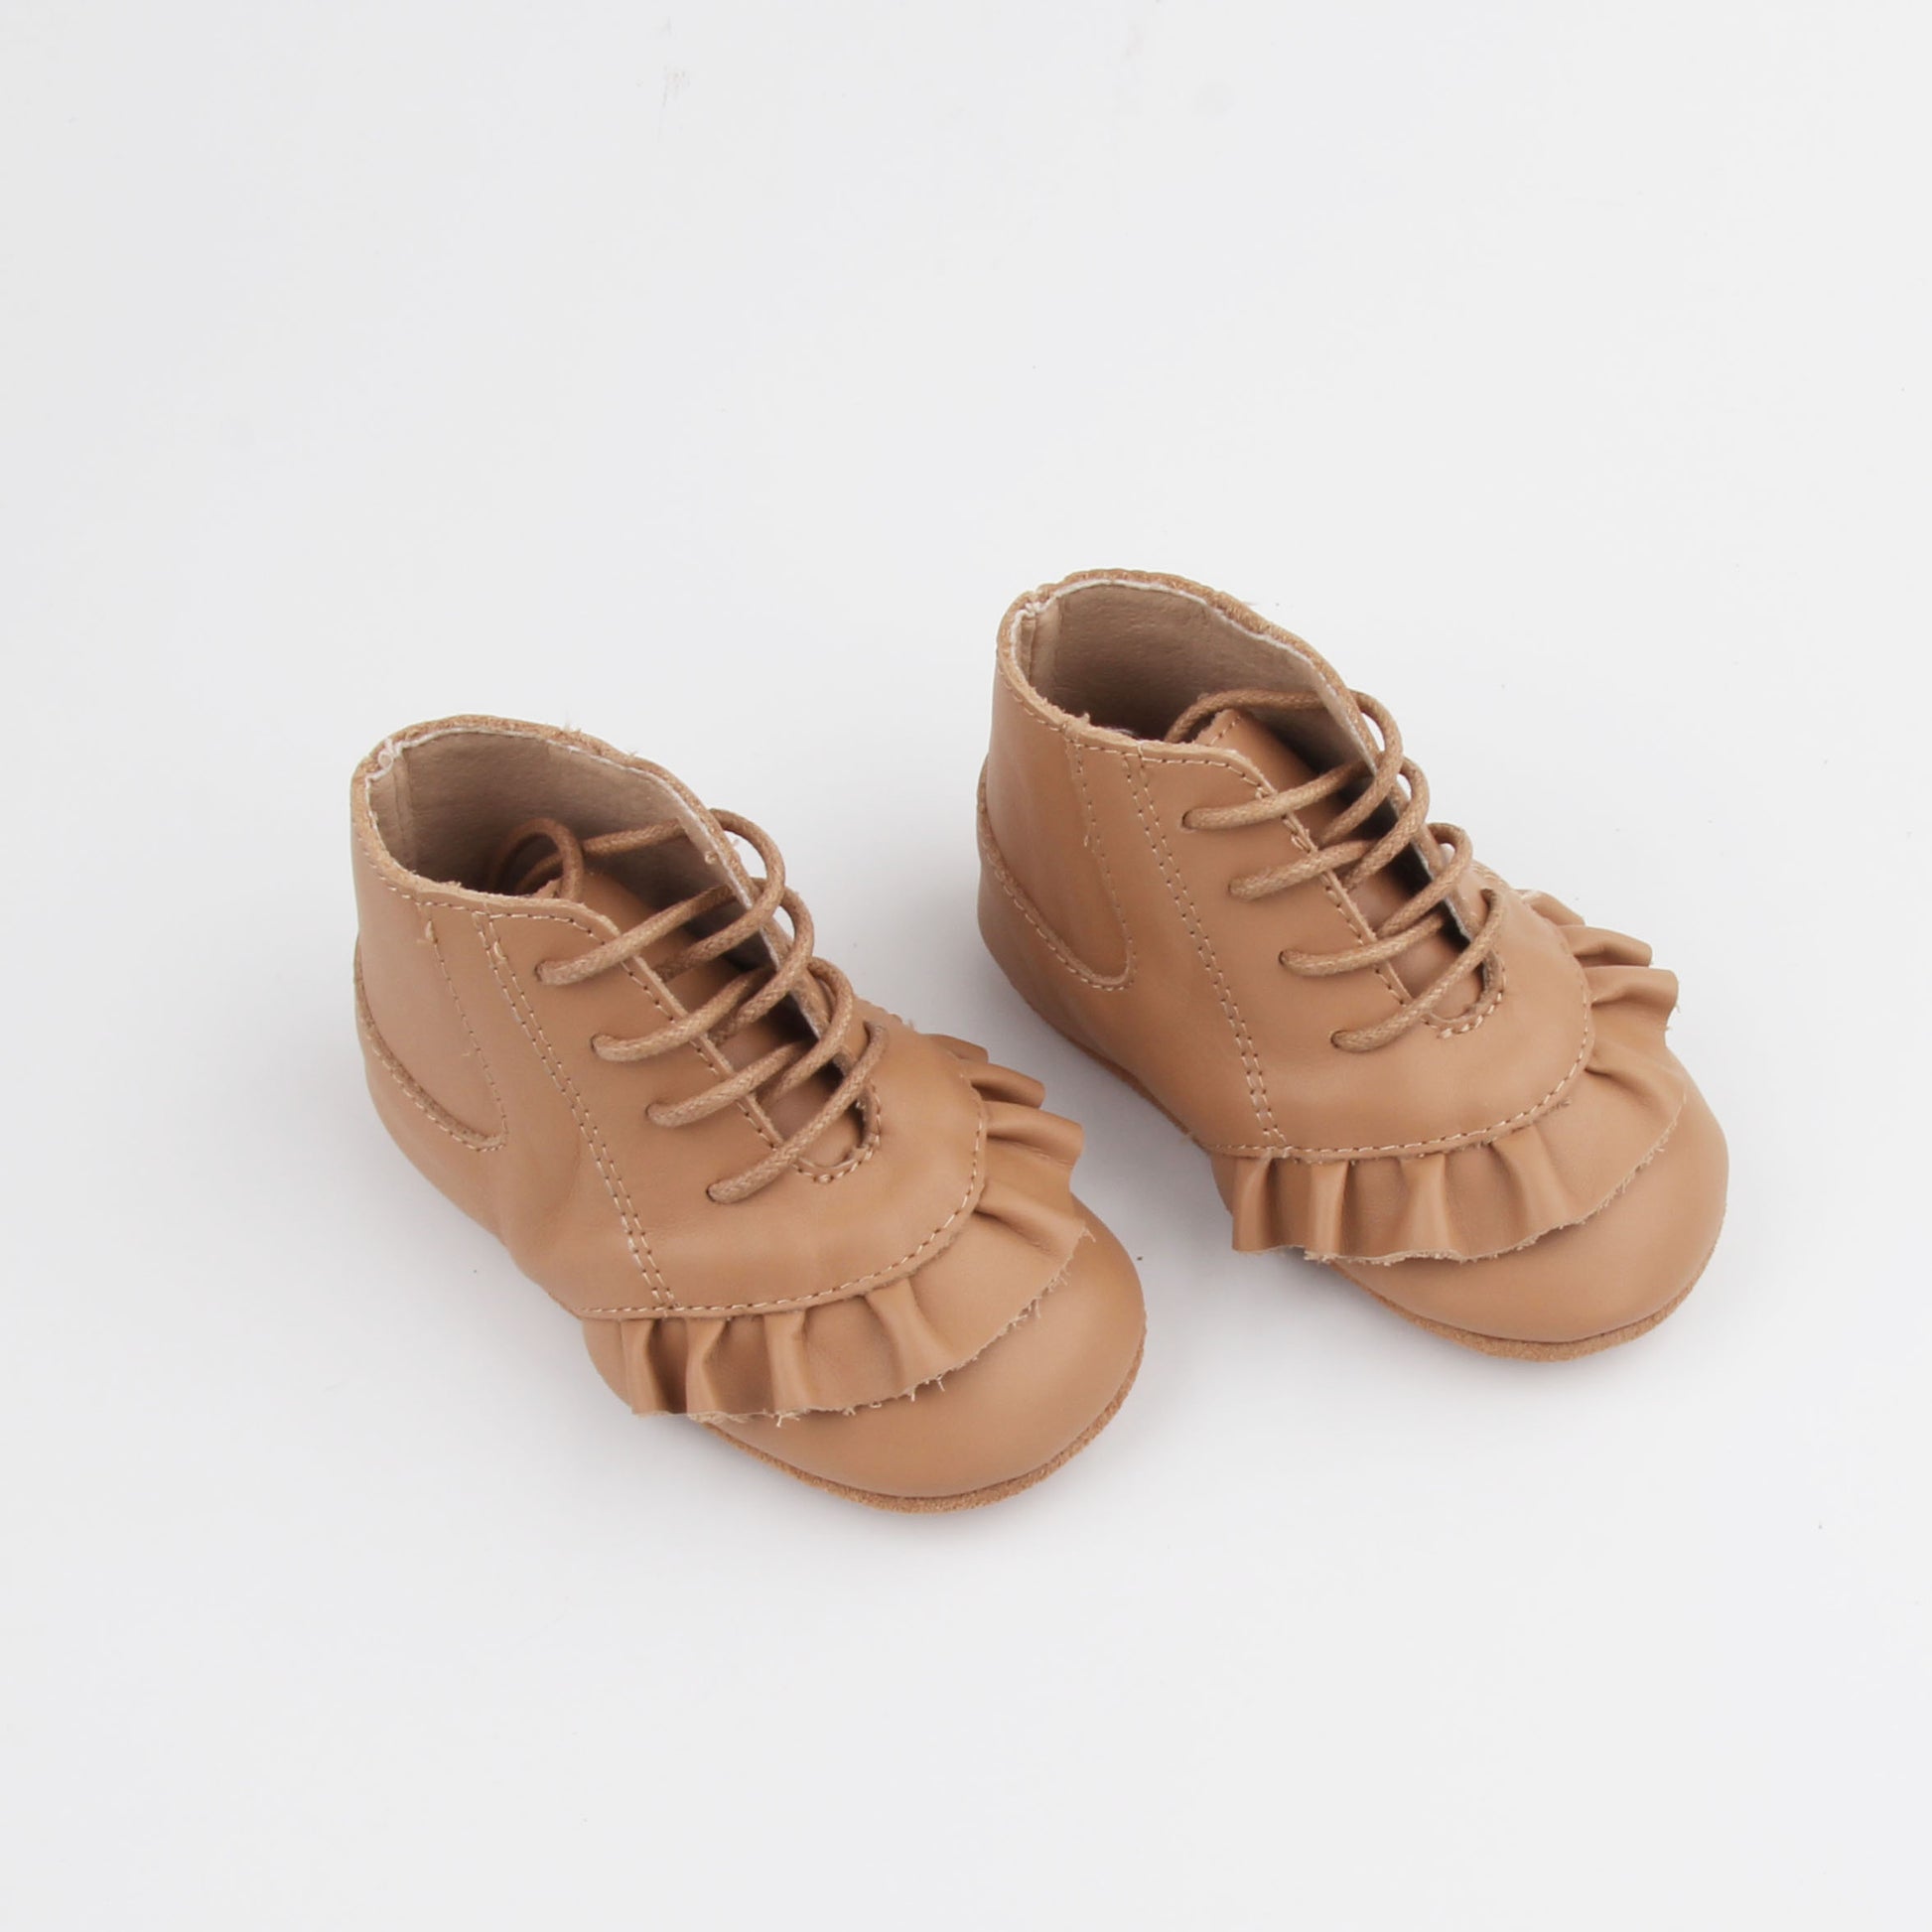 Baby, toddler & kids tan leather boots